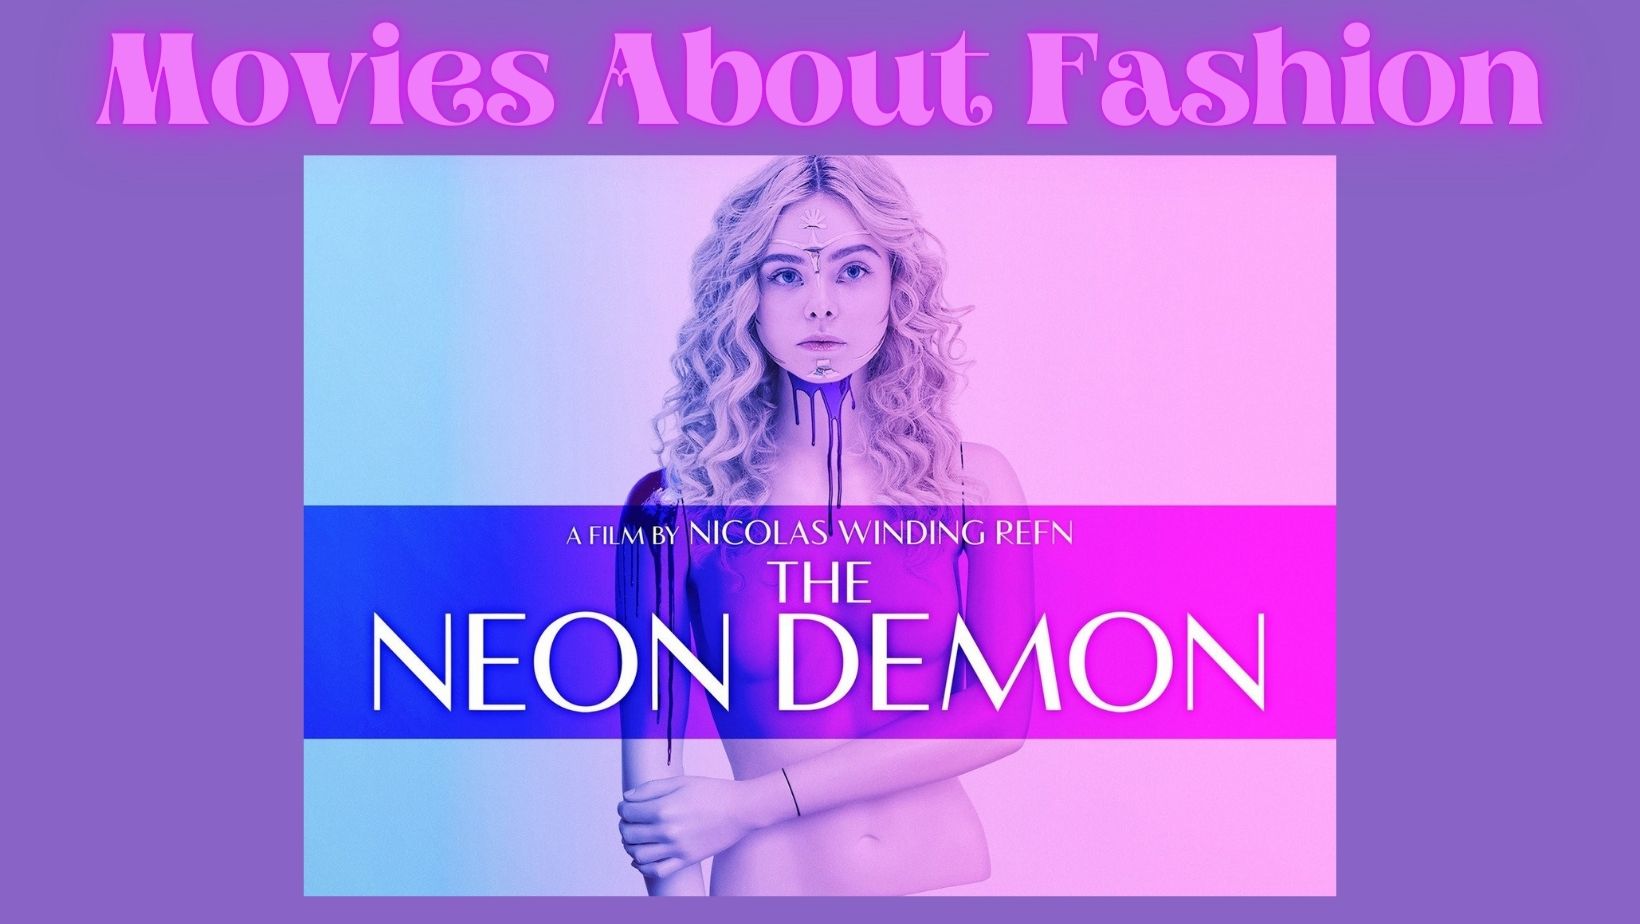 image from neon demon in purple and pink, text "movies about fashion"